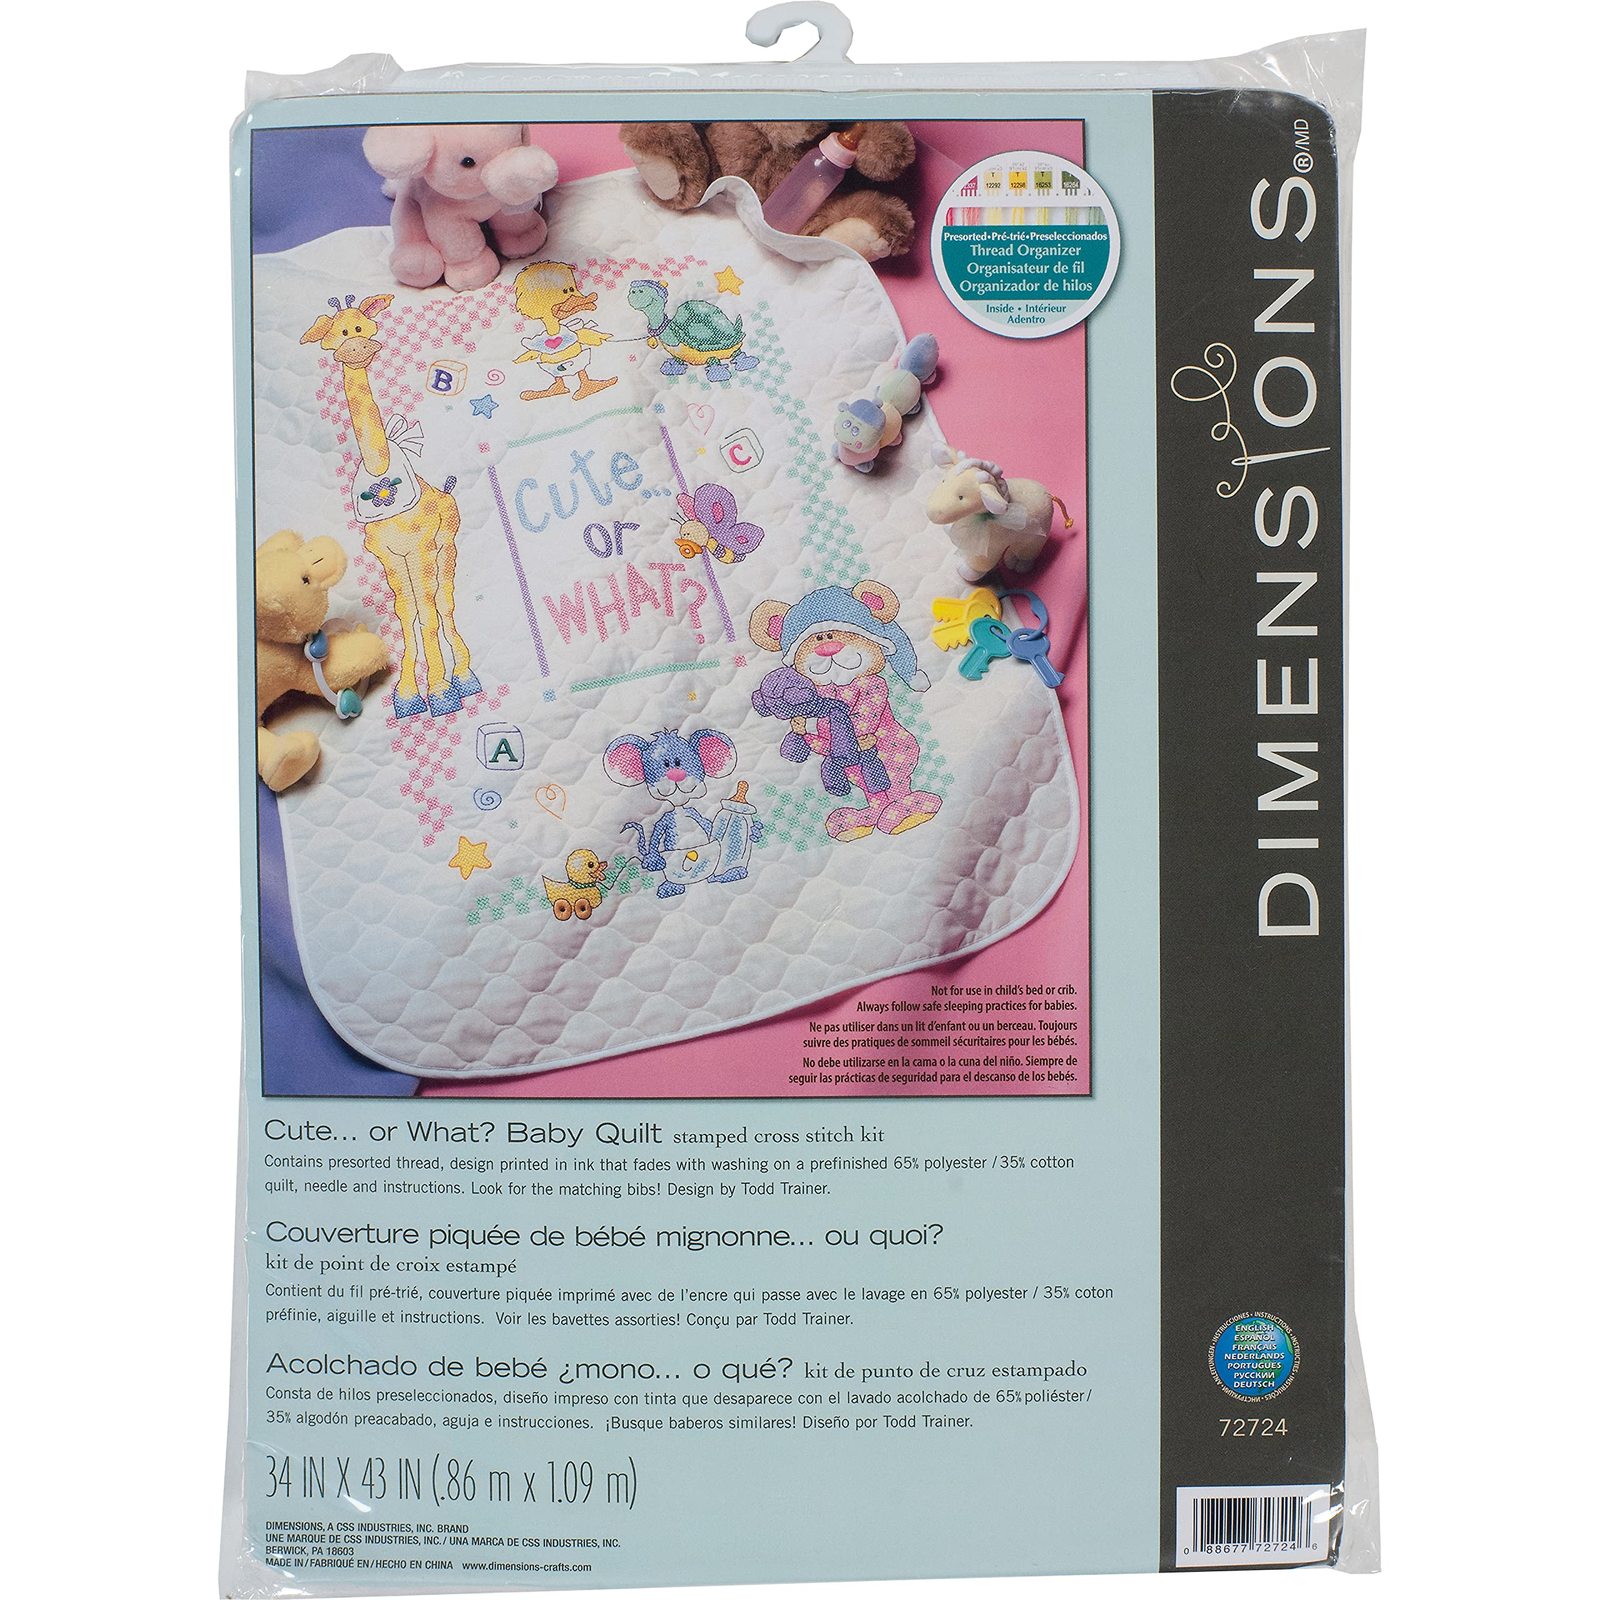 Dimensions Stamped Cross Stitch 'Cute or What?' DIY Baby Quilt, 34" x 43" - $25.99